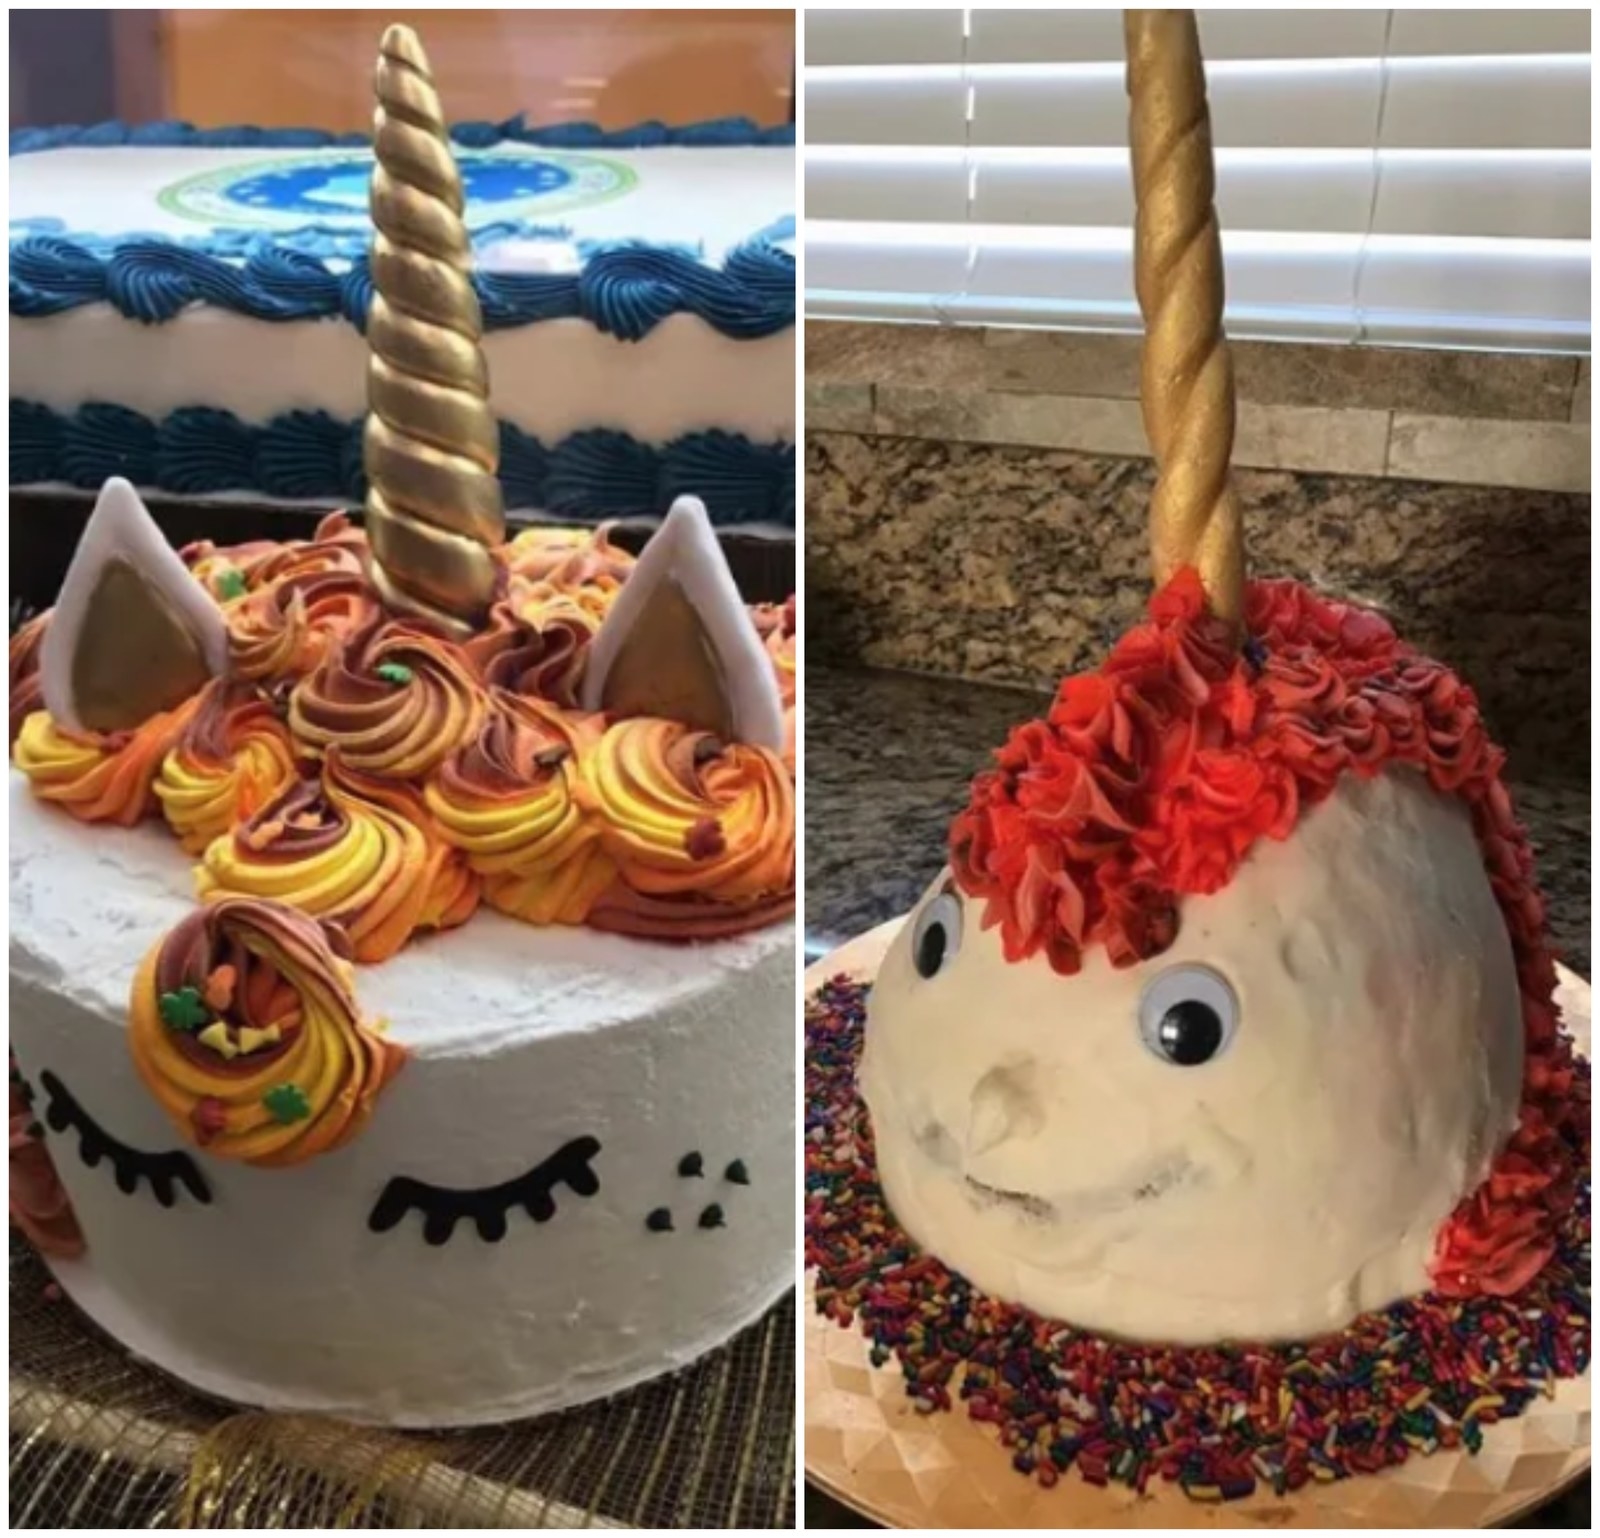 These 'Nailed It' Unicorn Cake Fails Just Destroyed The Magical Food Trend  — PHOTOS